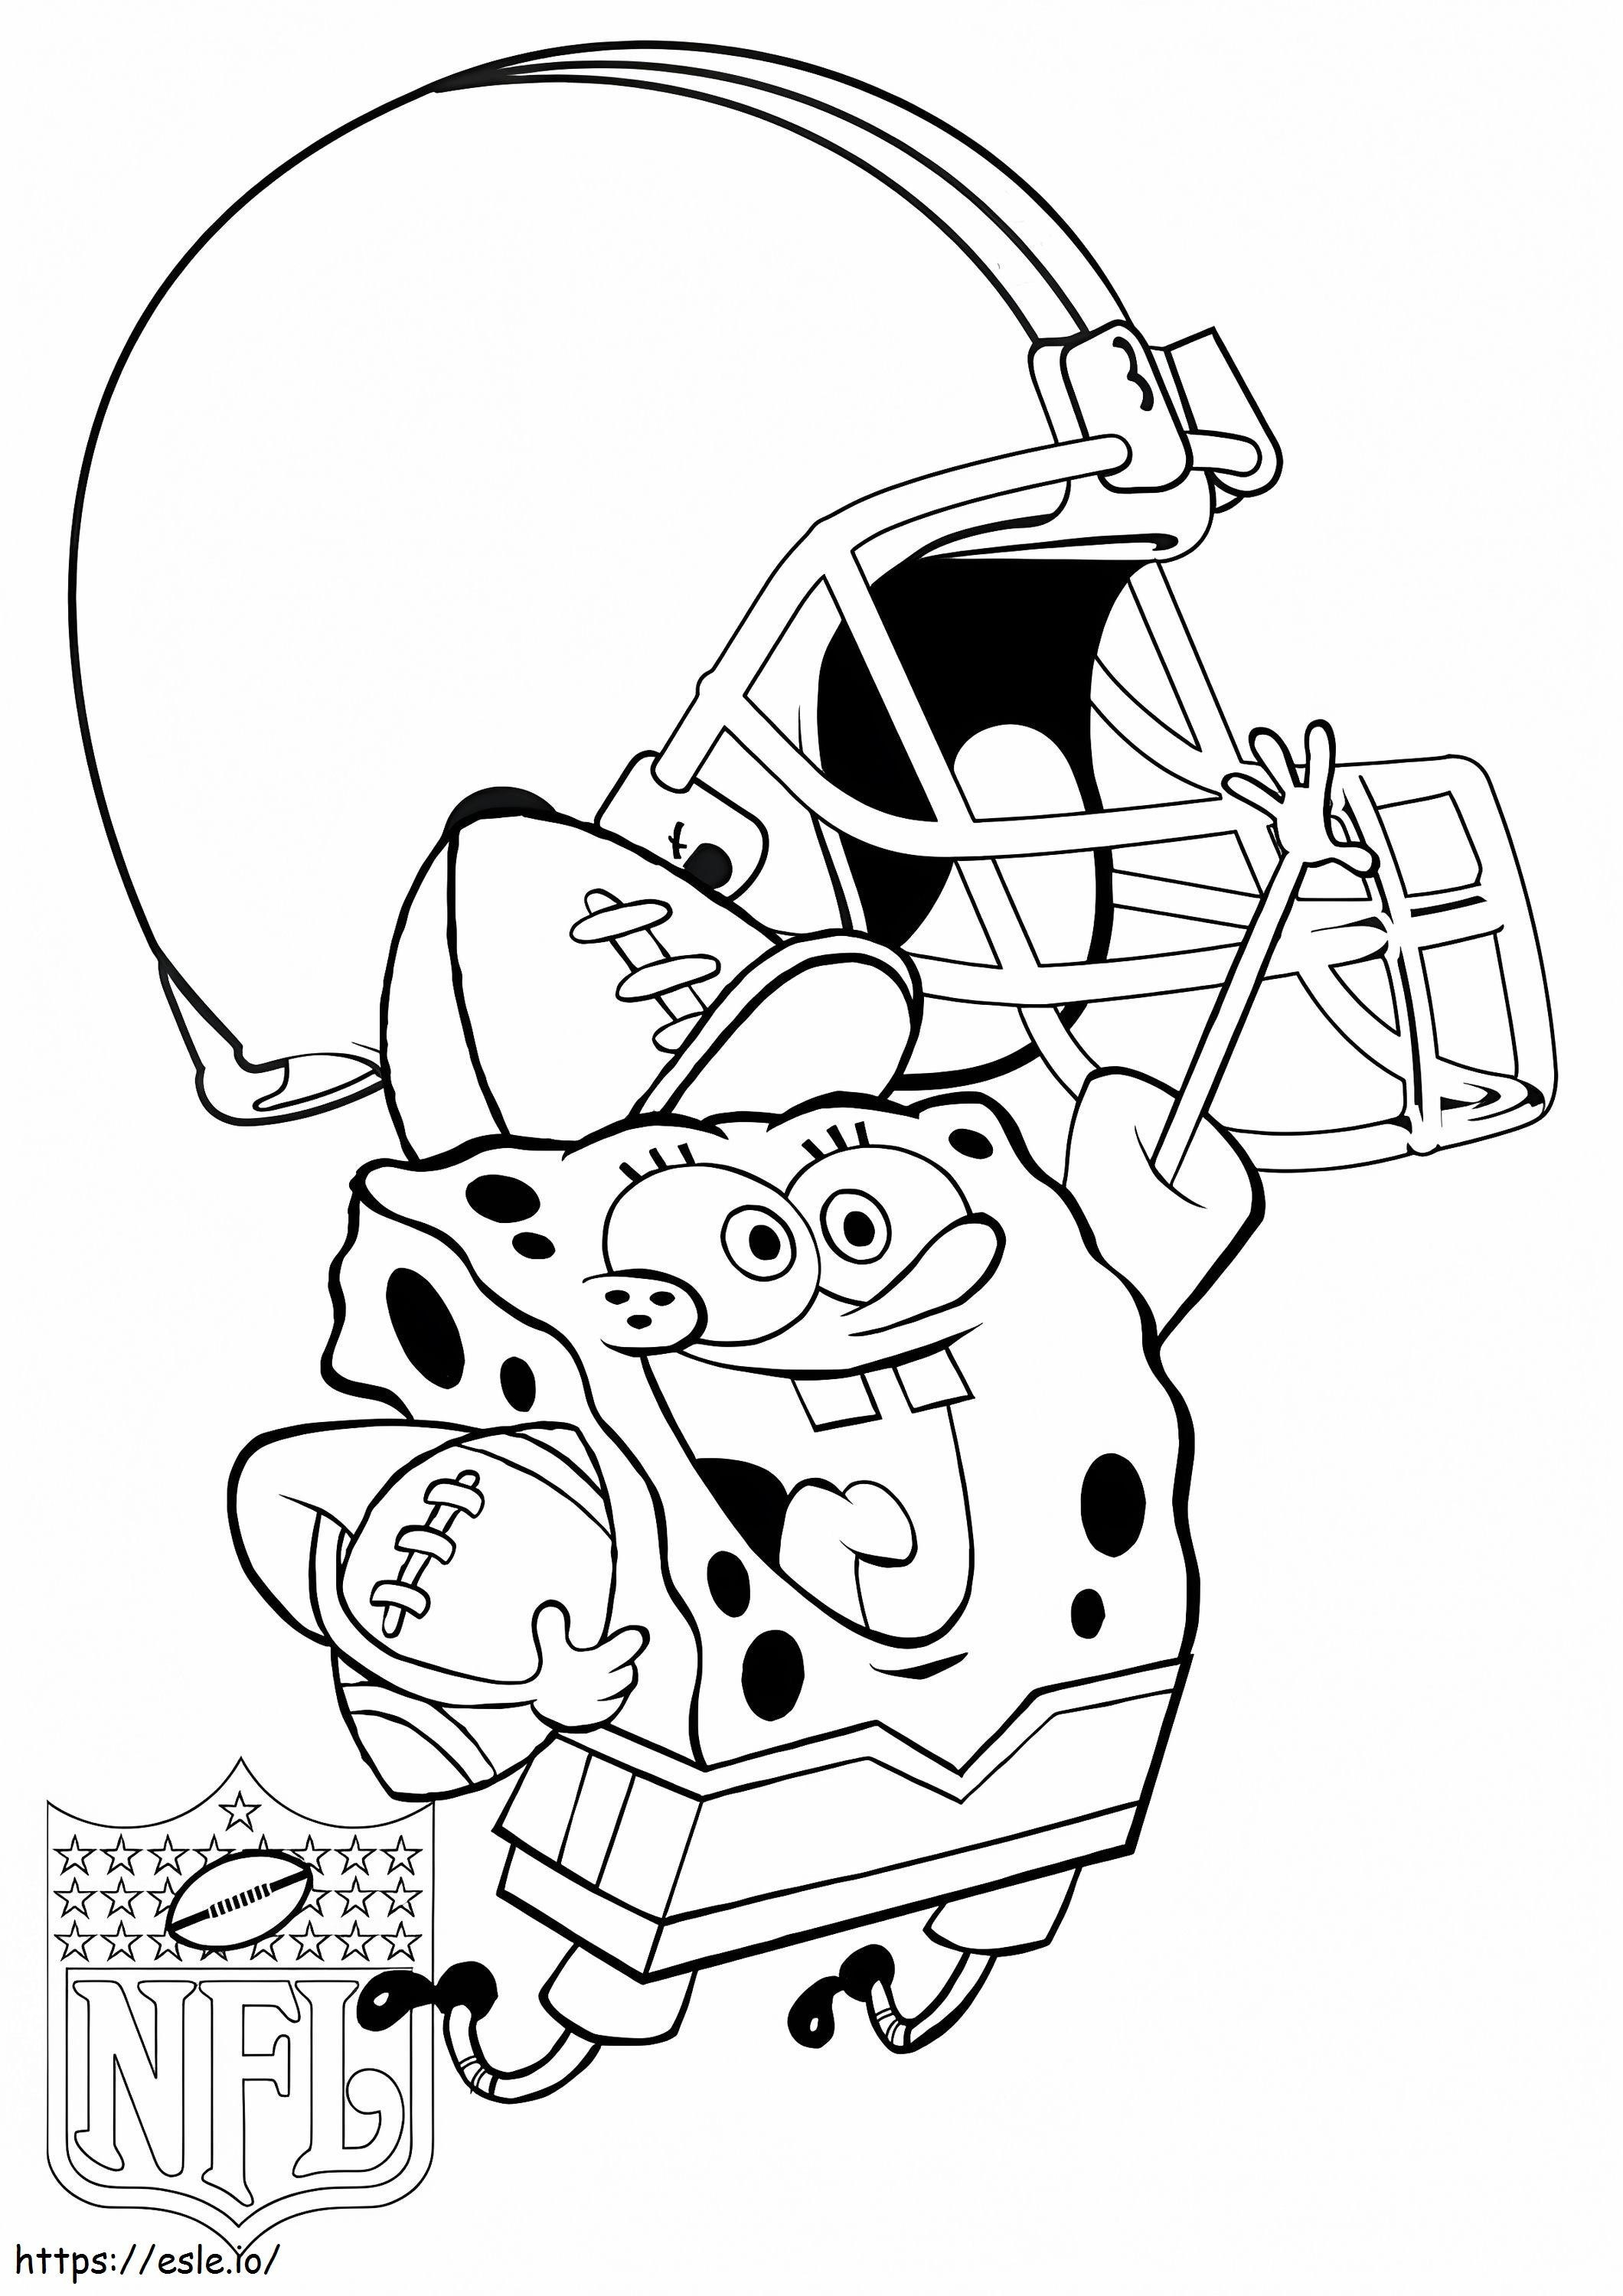 Spongebob Cleveland Browns 1 coloring page